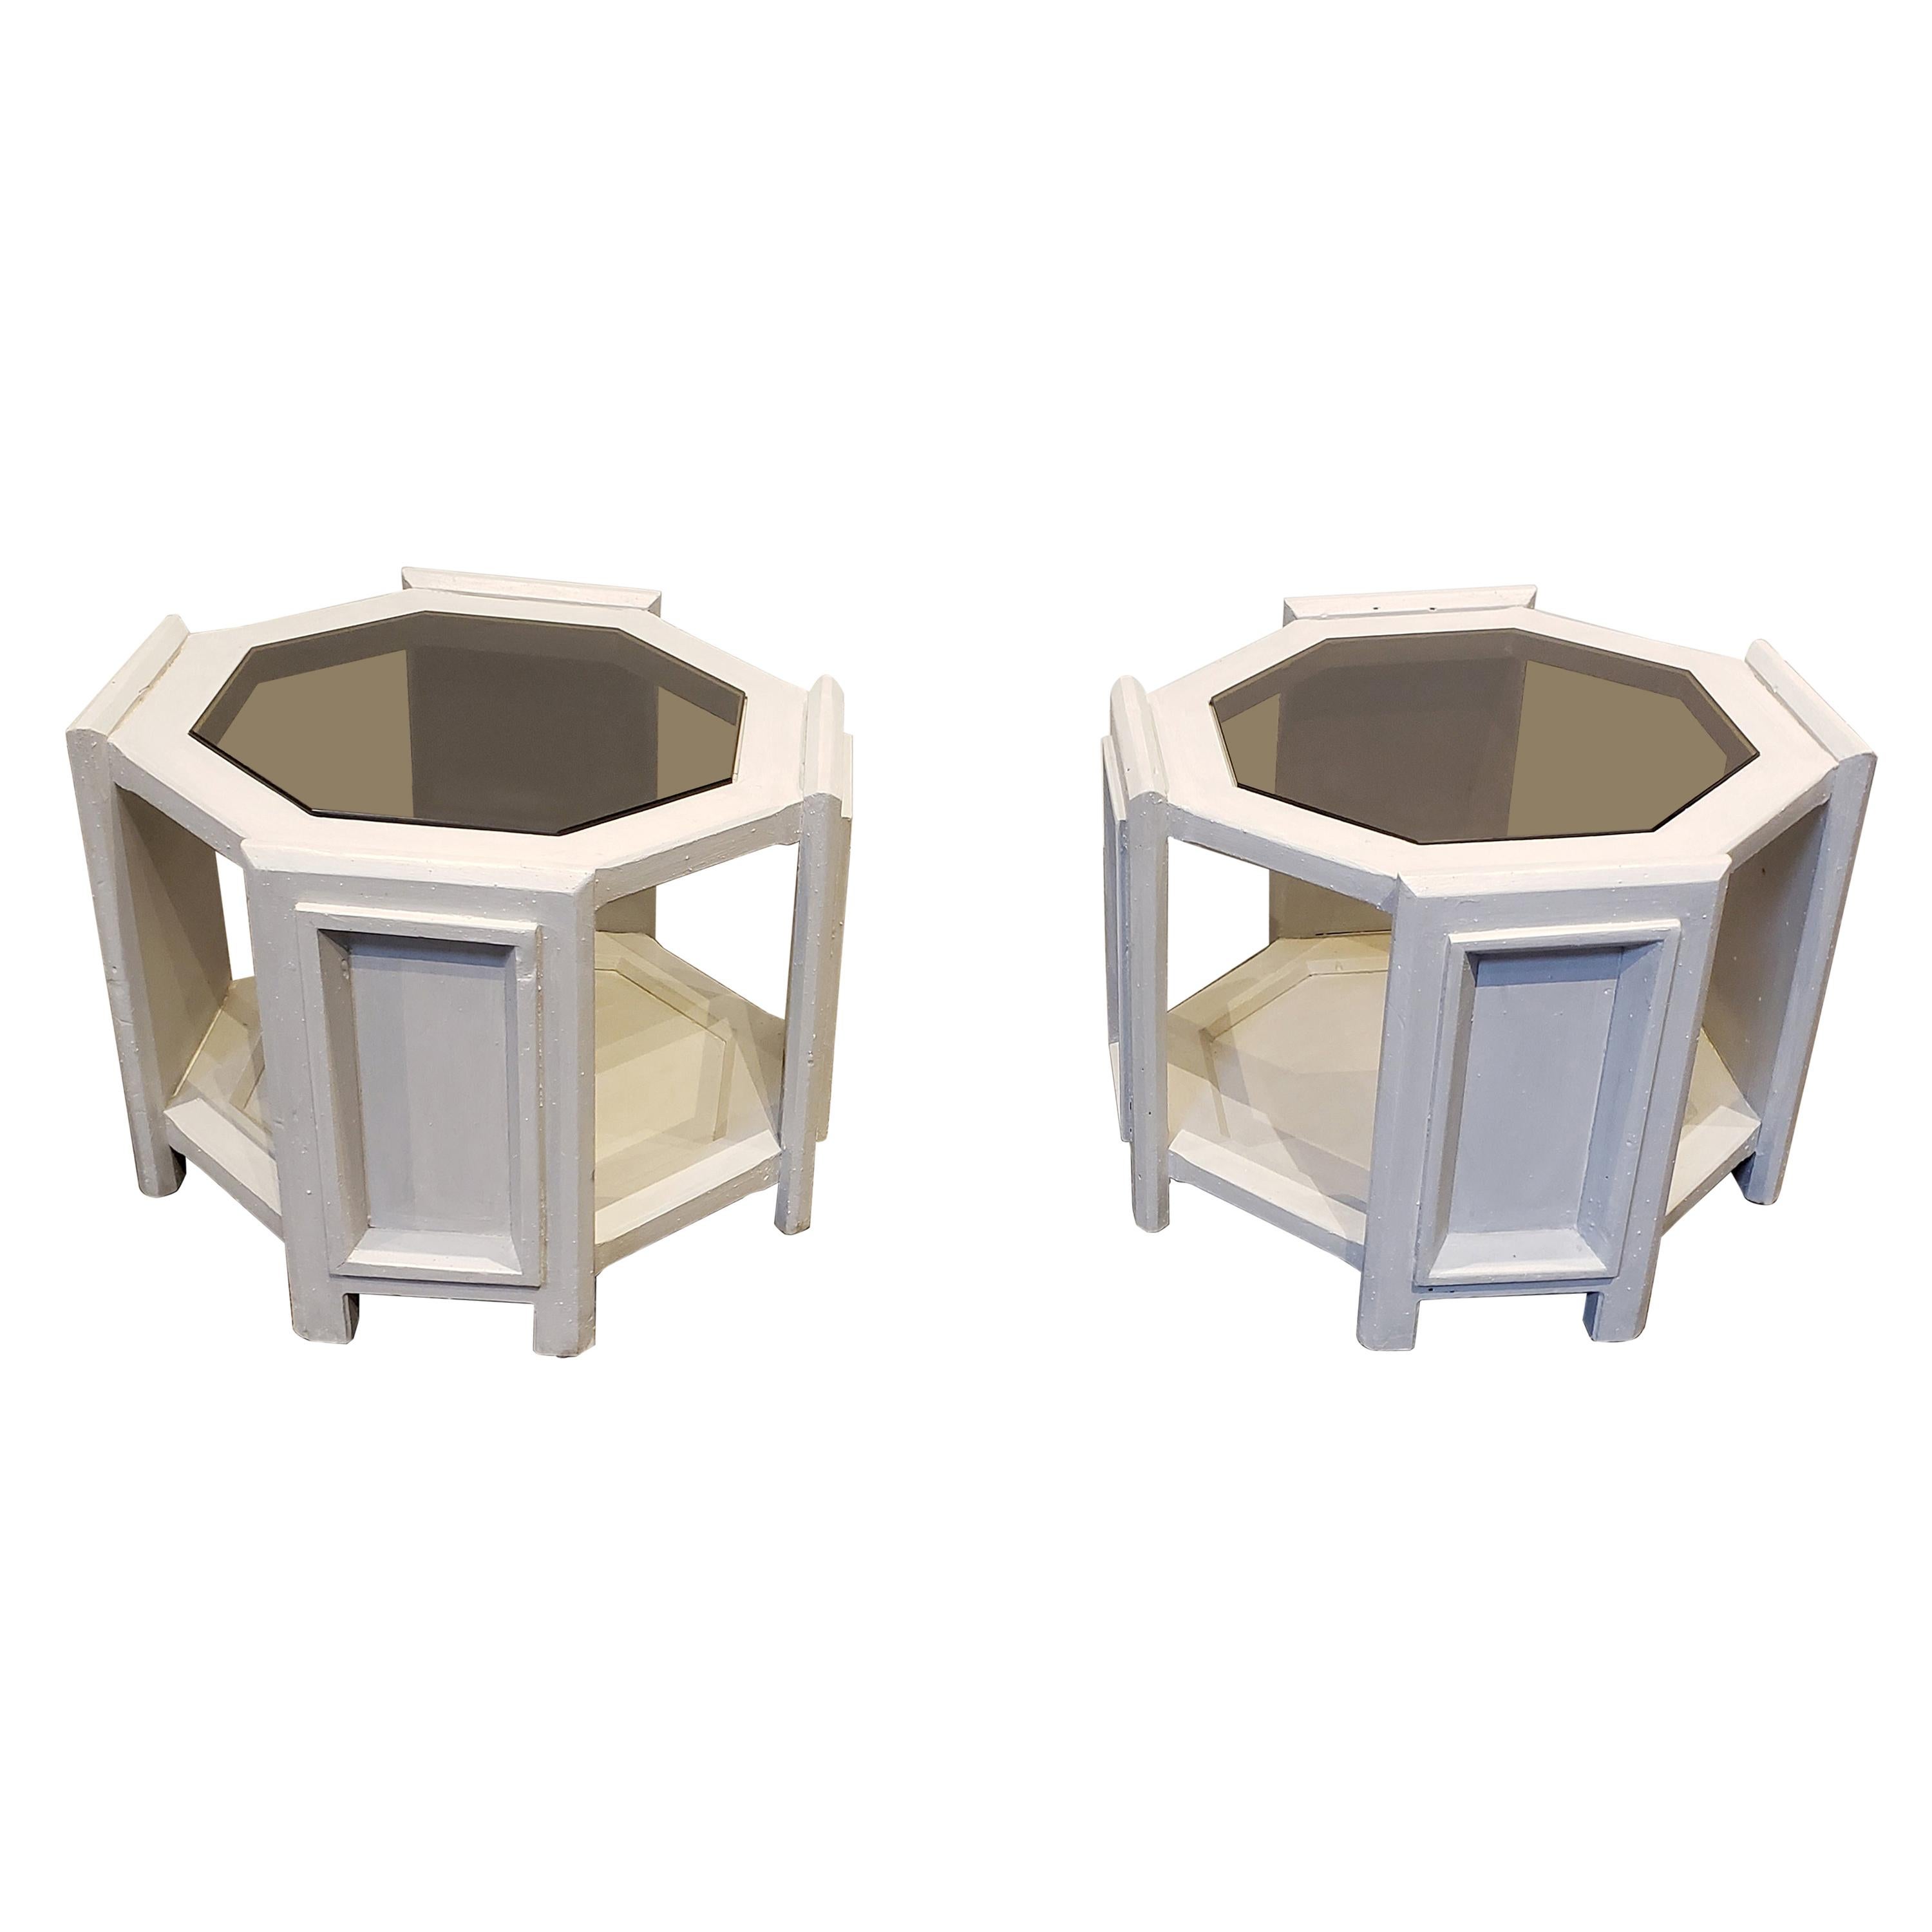 Pair of Octagonal Brutalist Memphis Side Tables with Faux Concrete Finish For Sale